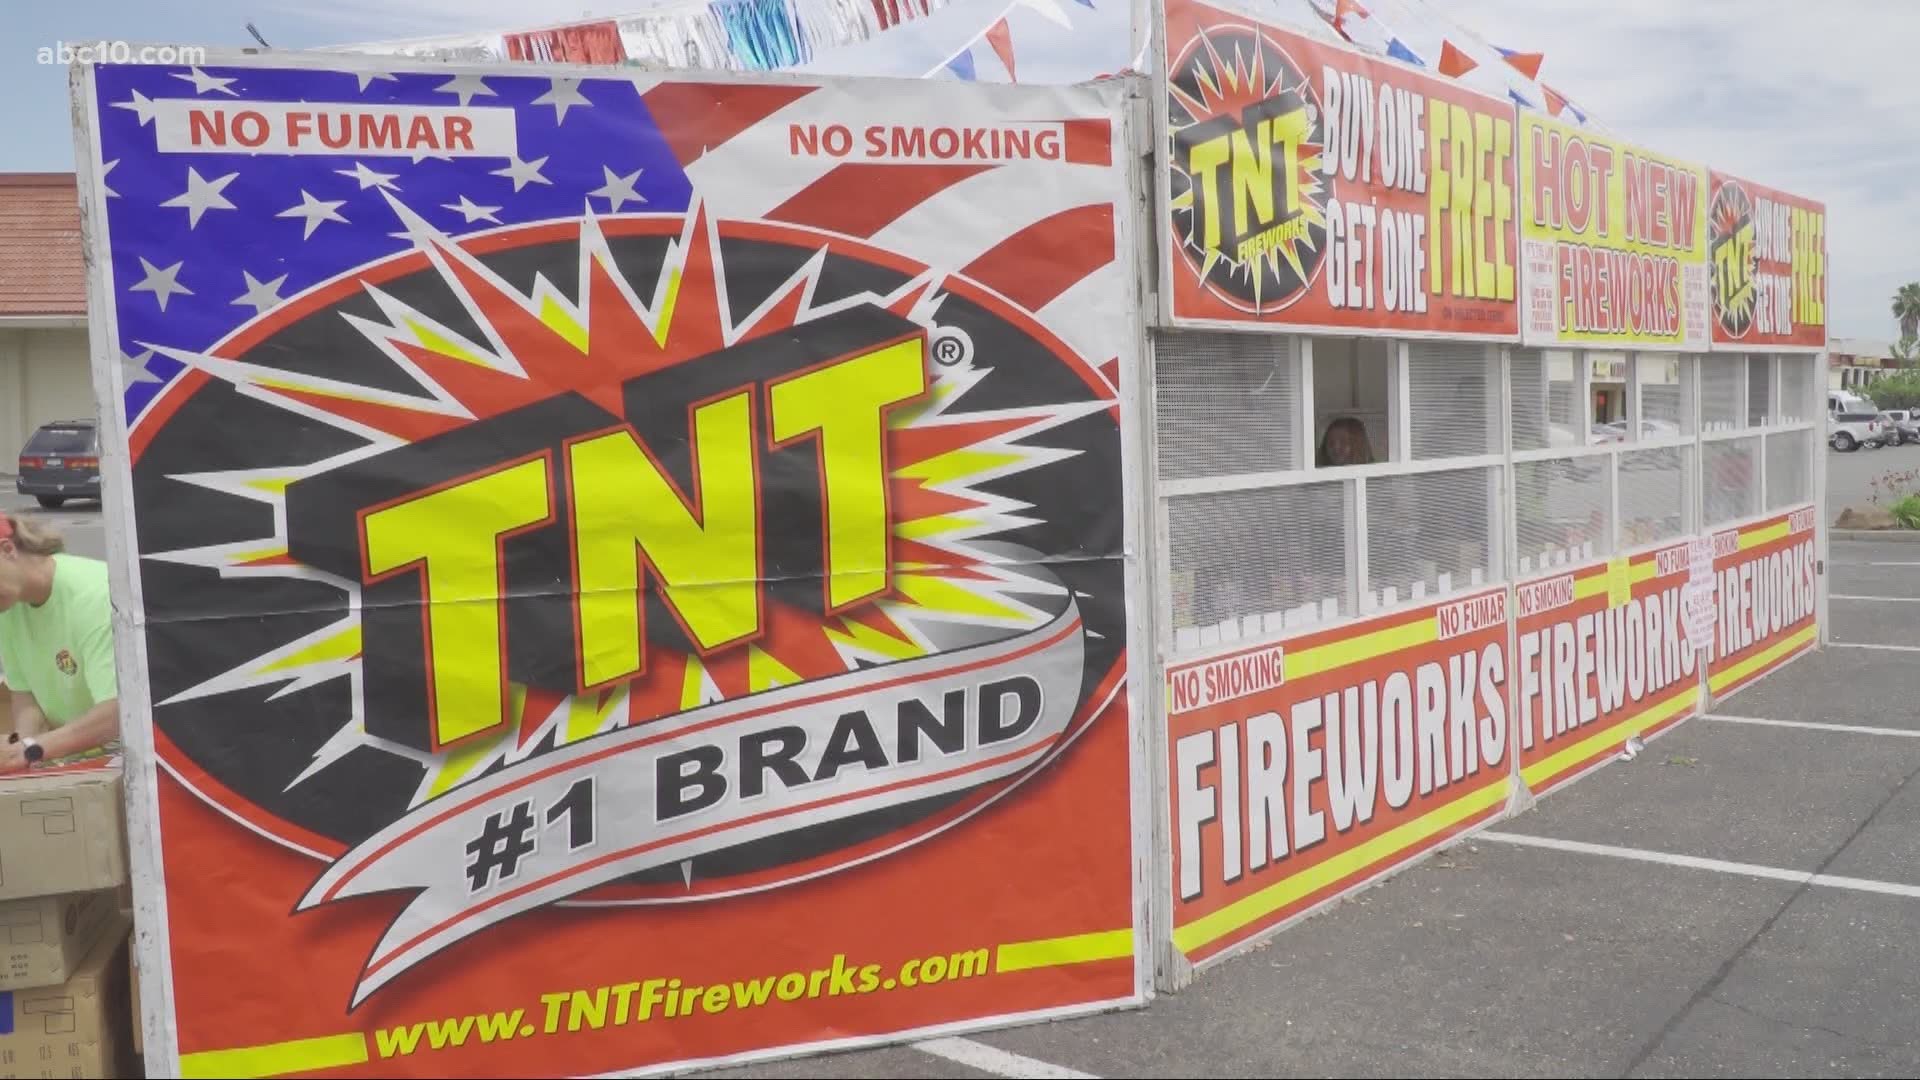 Local law enforcement and fire departments are keeping an eye on firework stands to make sure they are legal.